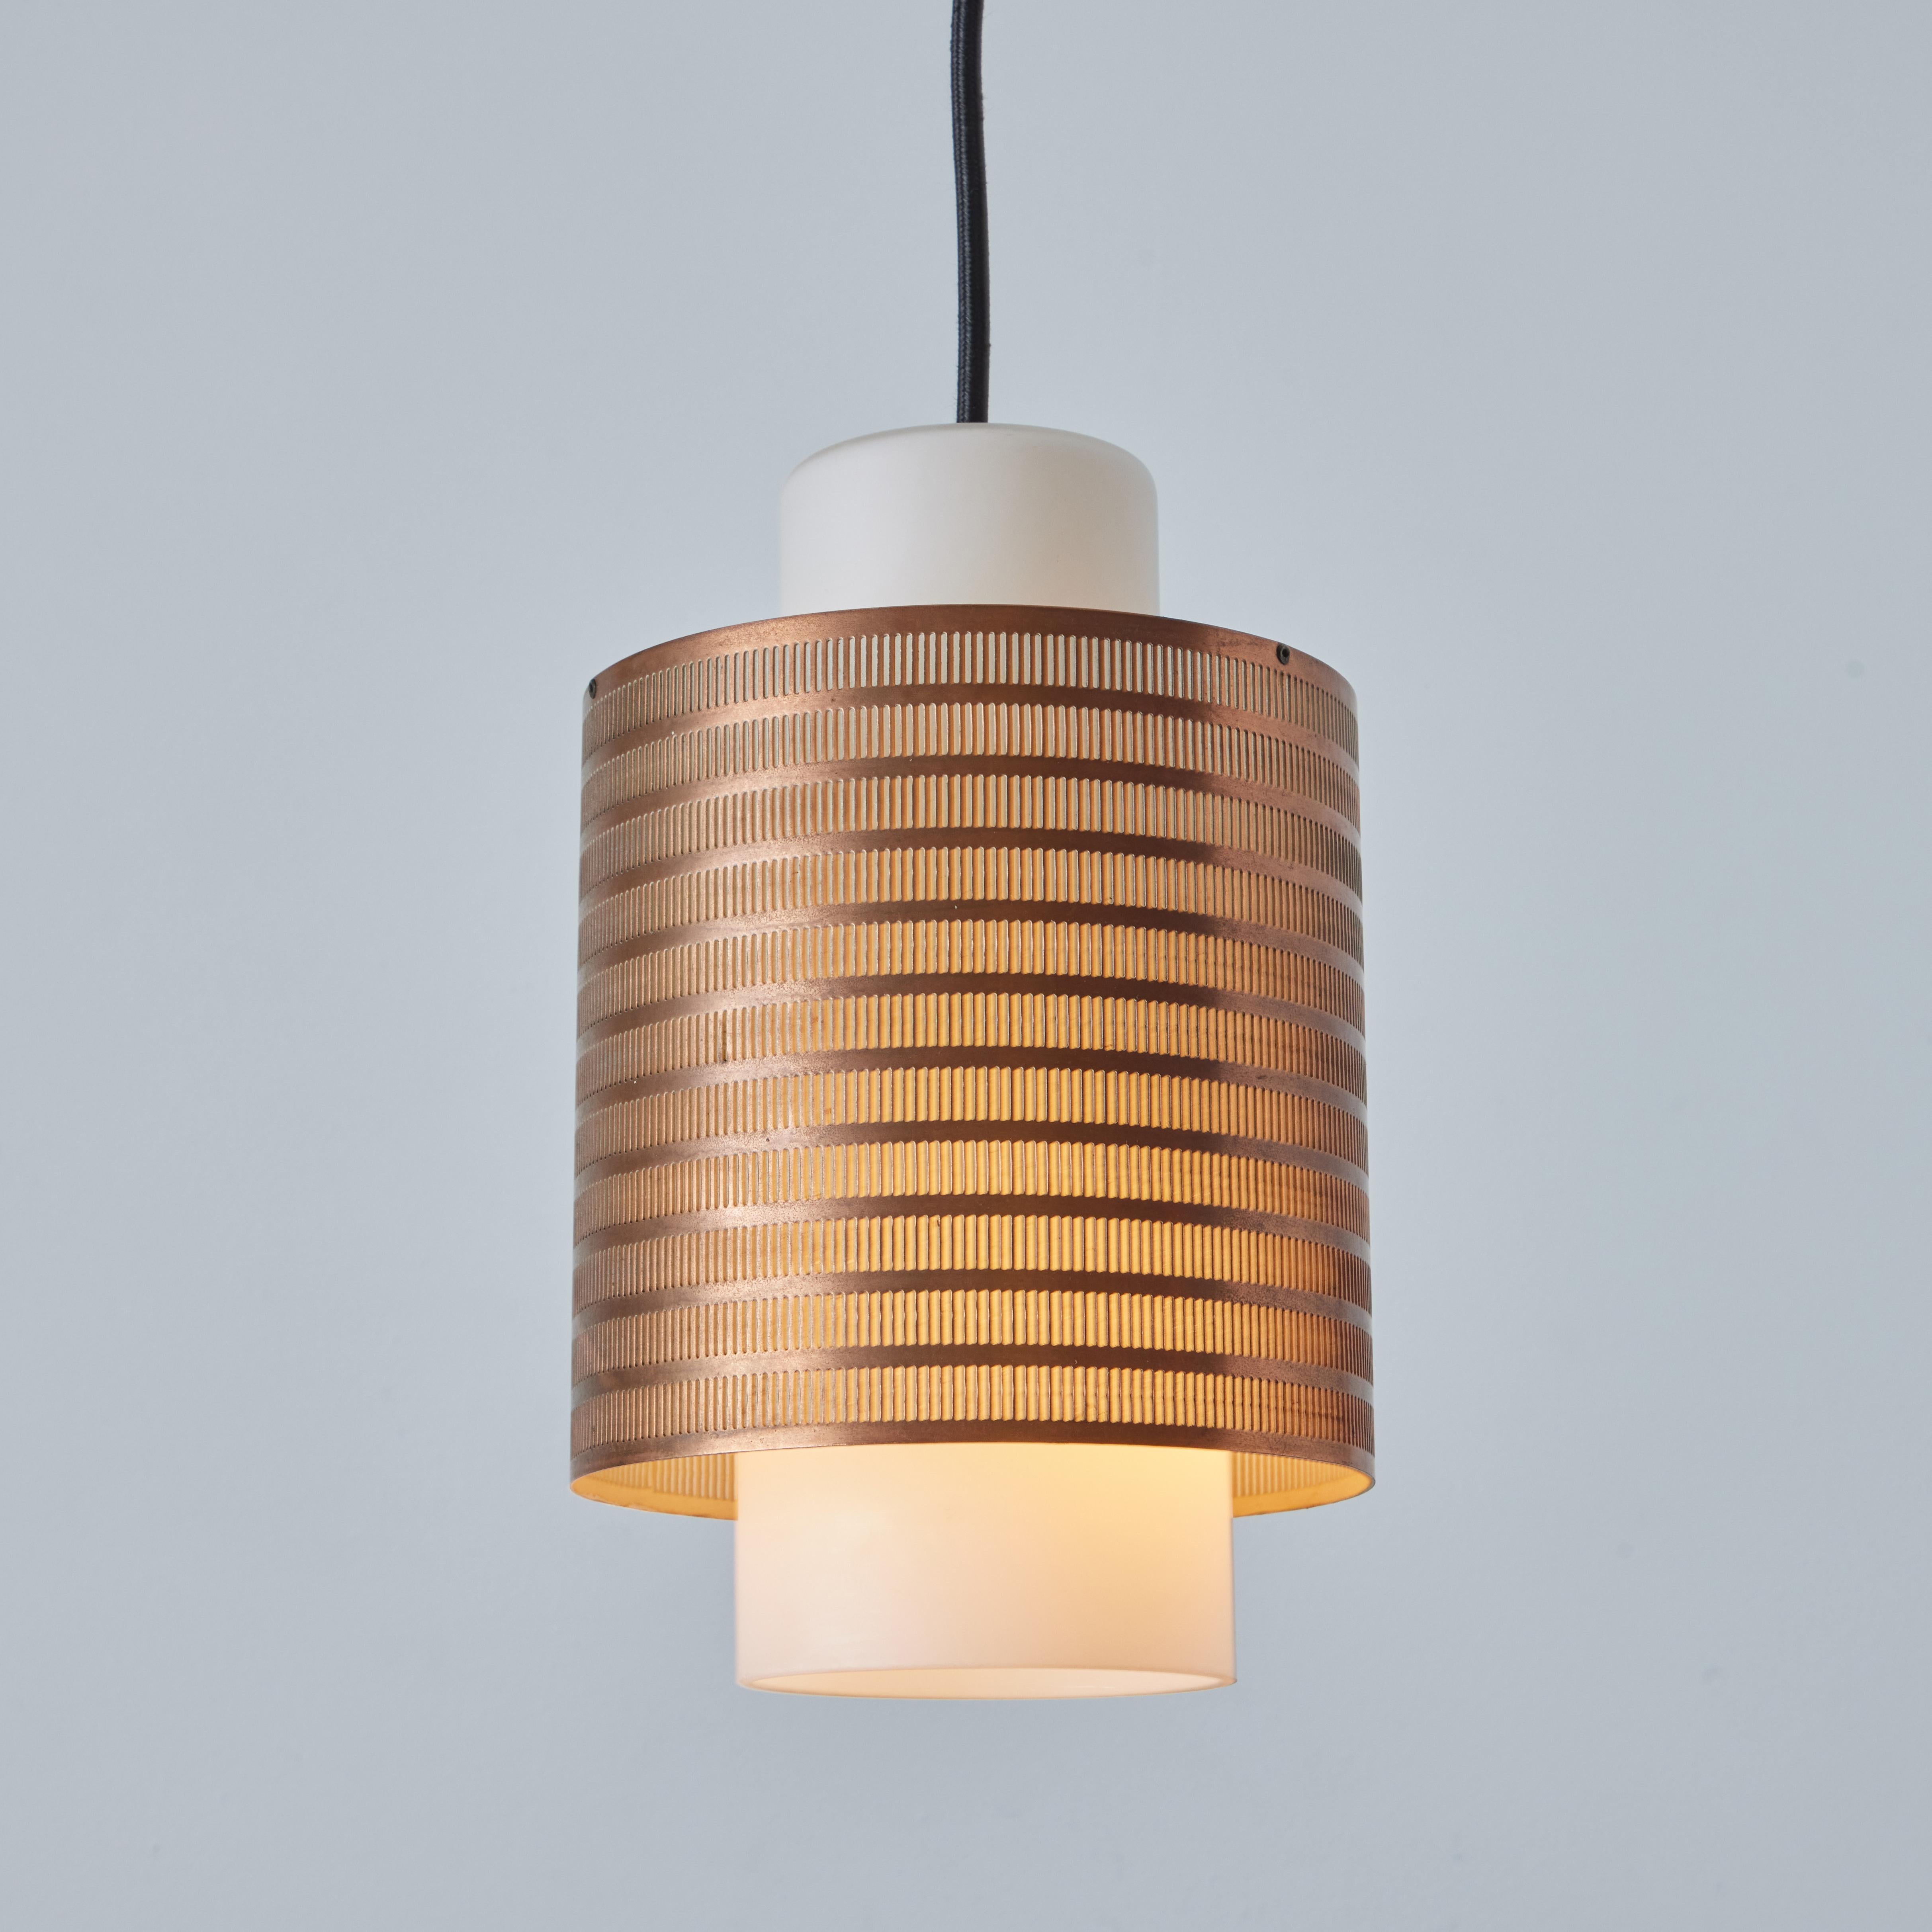 1960s Danish Modern perforated copper and glass pendant attributed to Lyfa. Executed in a subtly patinated perforated copper shade with a blown opaline glass diffuser, Denmark, circa 1960s. A quintessentially Scandinavian pendant of attractive scale